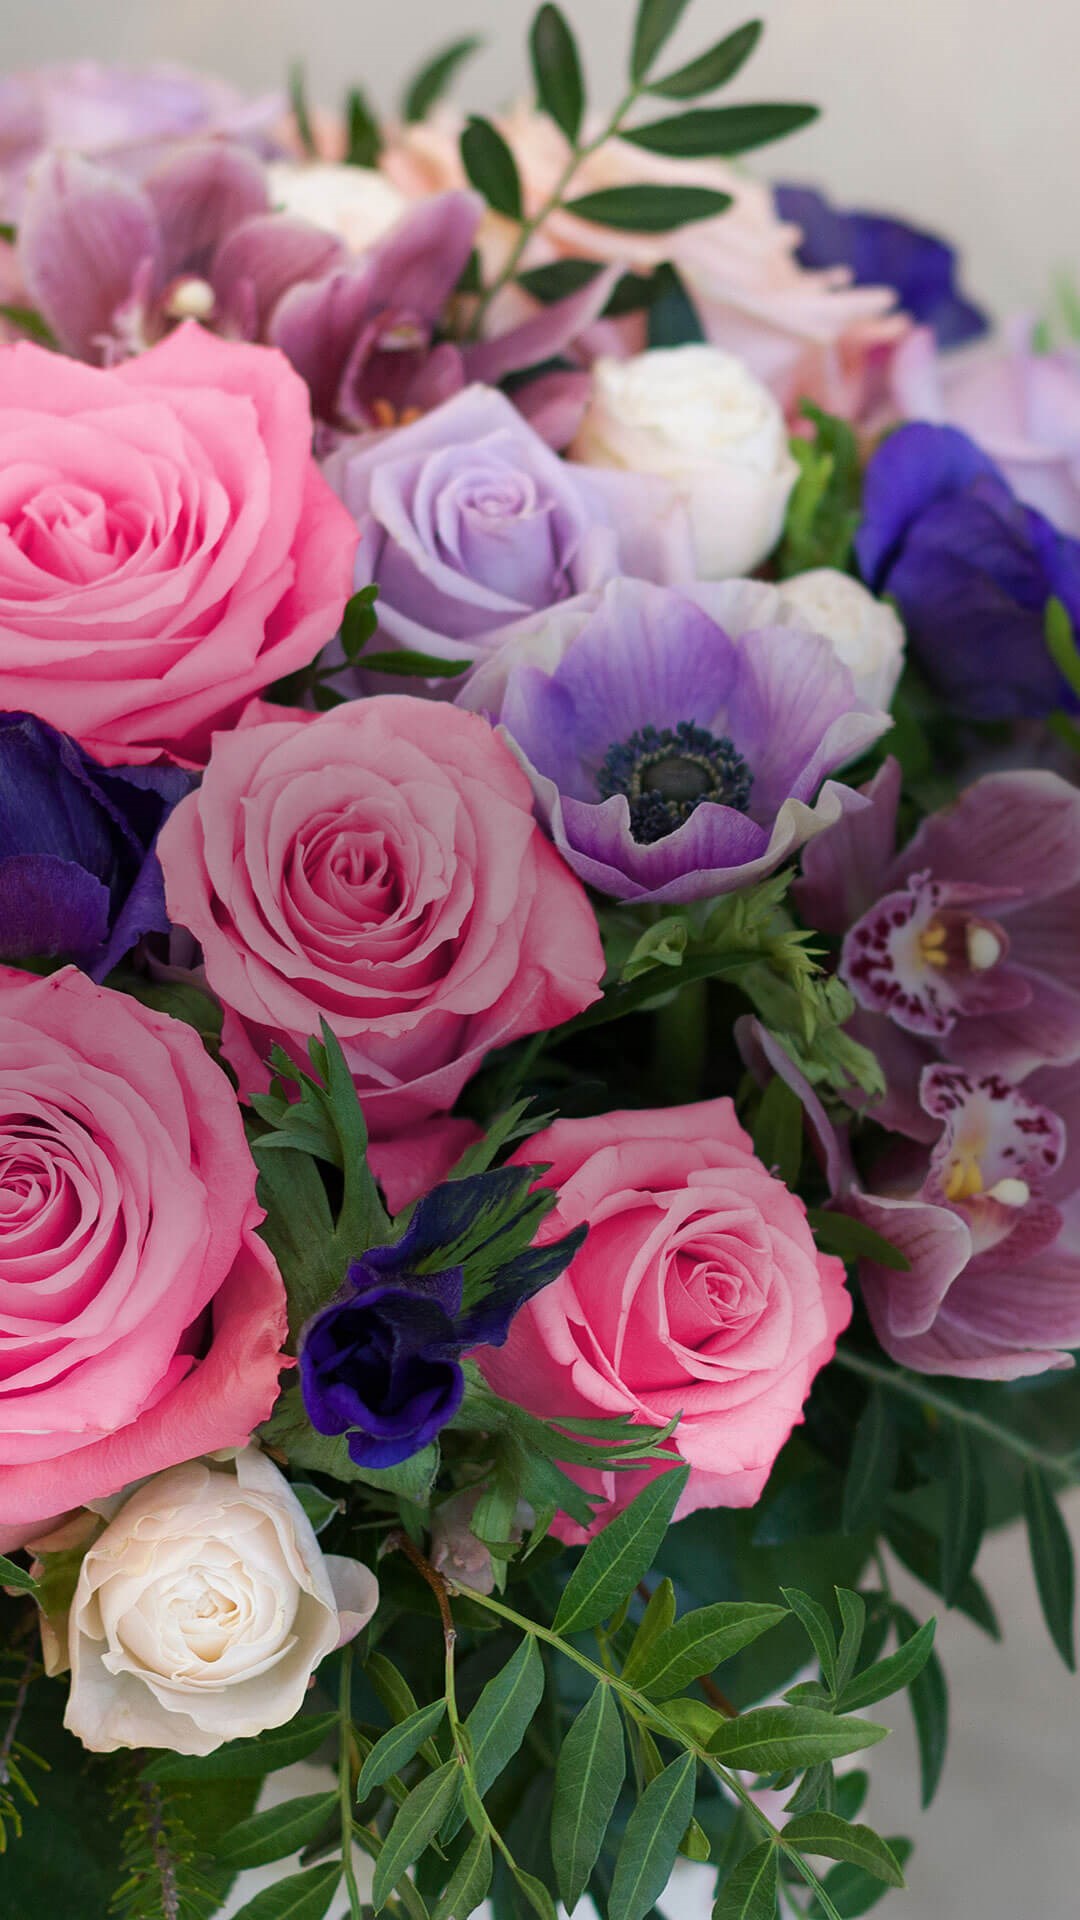 Portrait of a bouquet of blue, pink and purple flowers